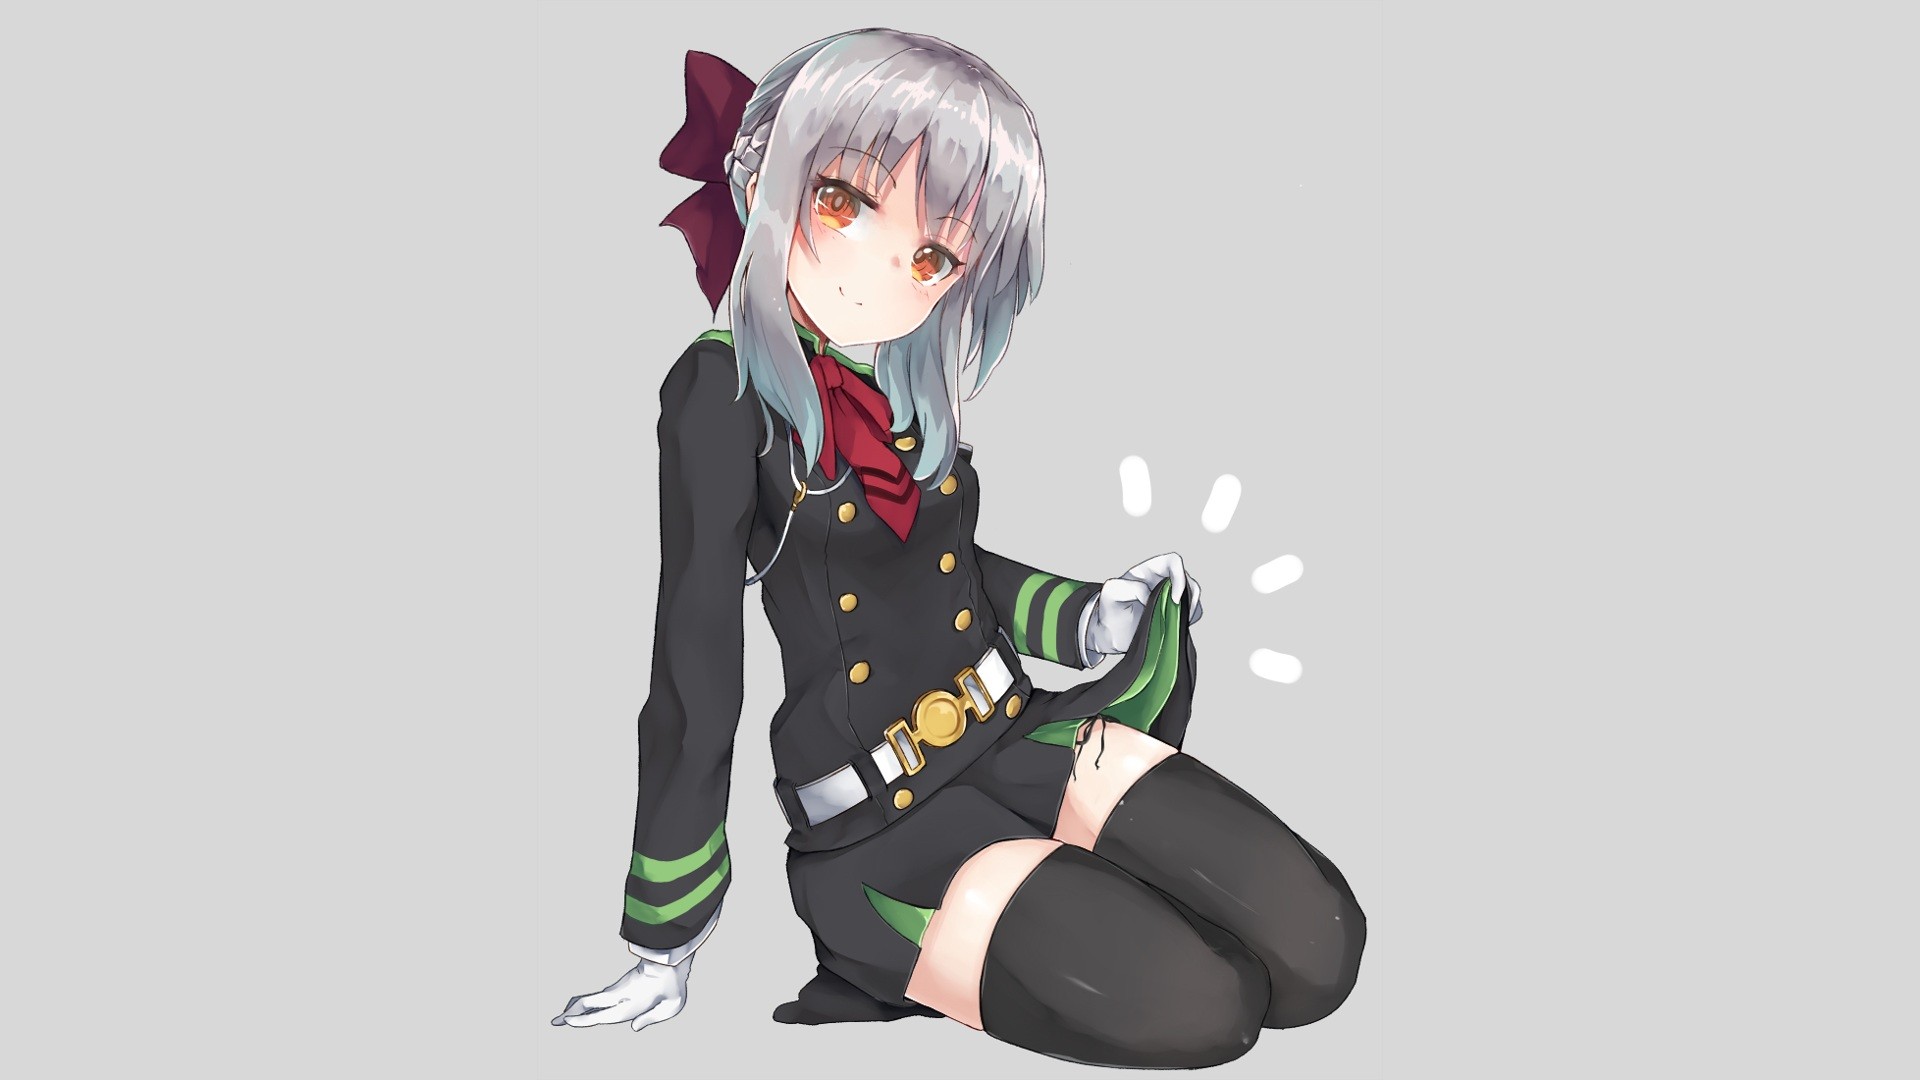 Anime 1920x1080 anime anime girls hat Owari No Seraph Hiiragi Shinoa silver hair thigh-highs simple background stockings legs together black stockings smiling looking at viewer